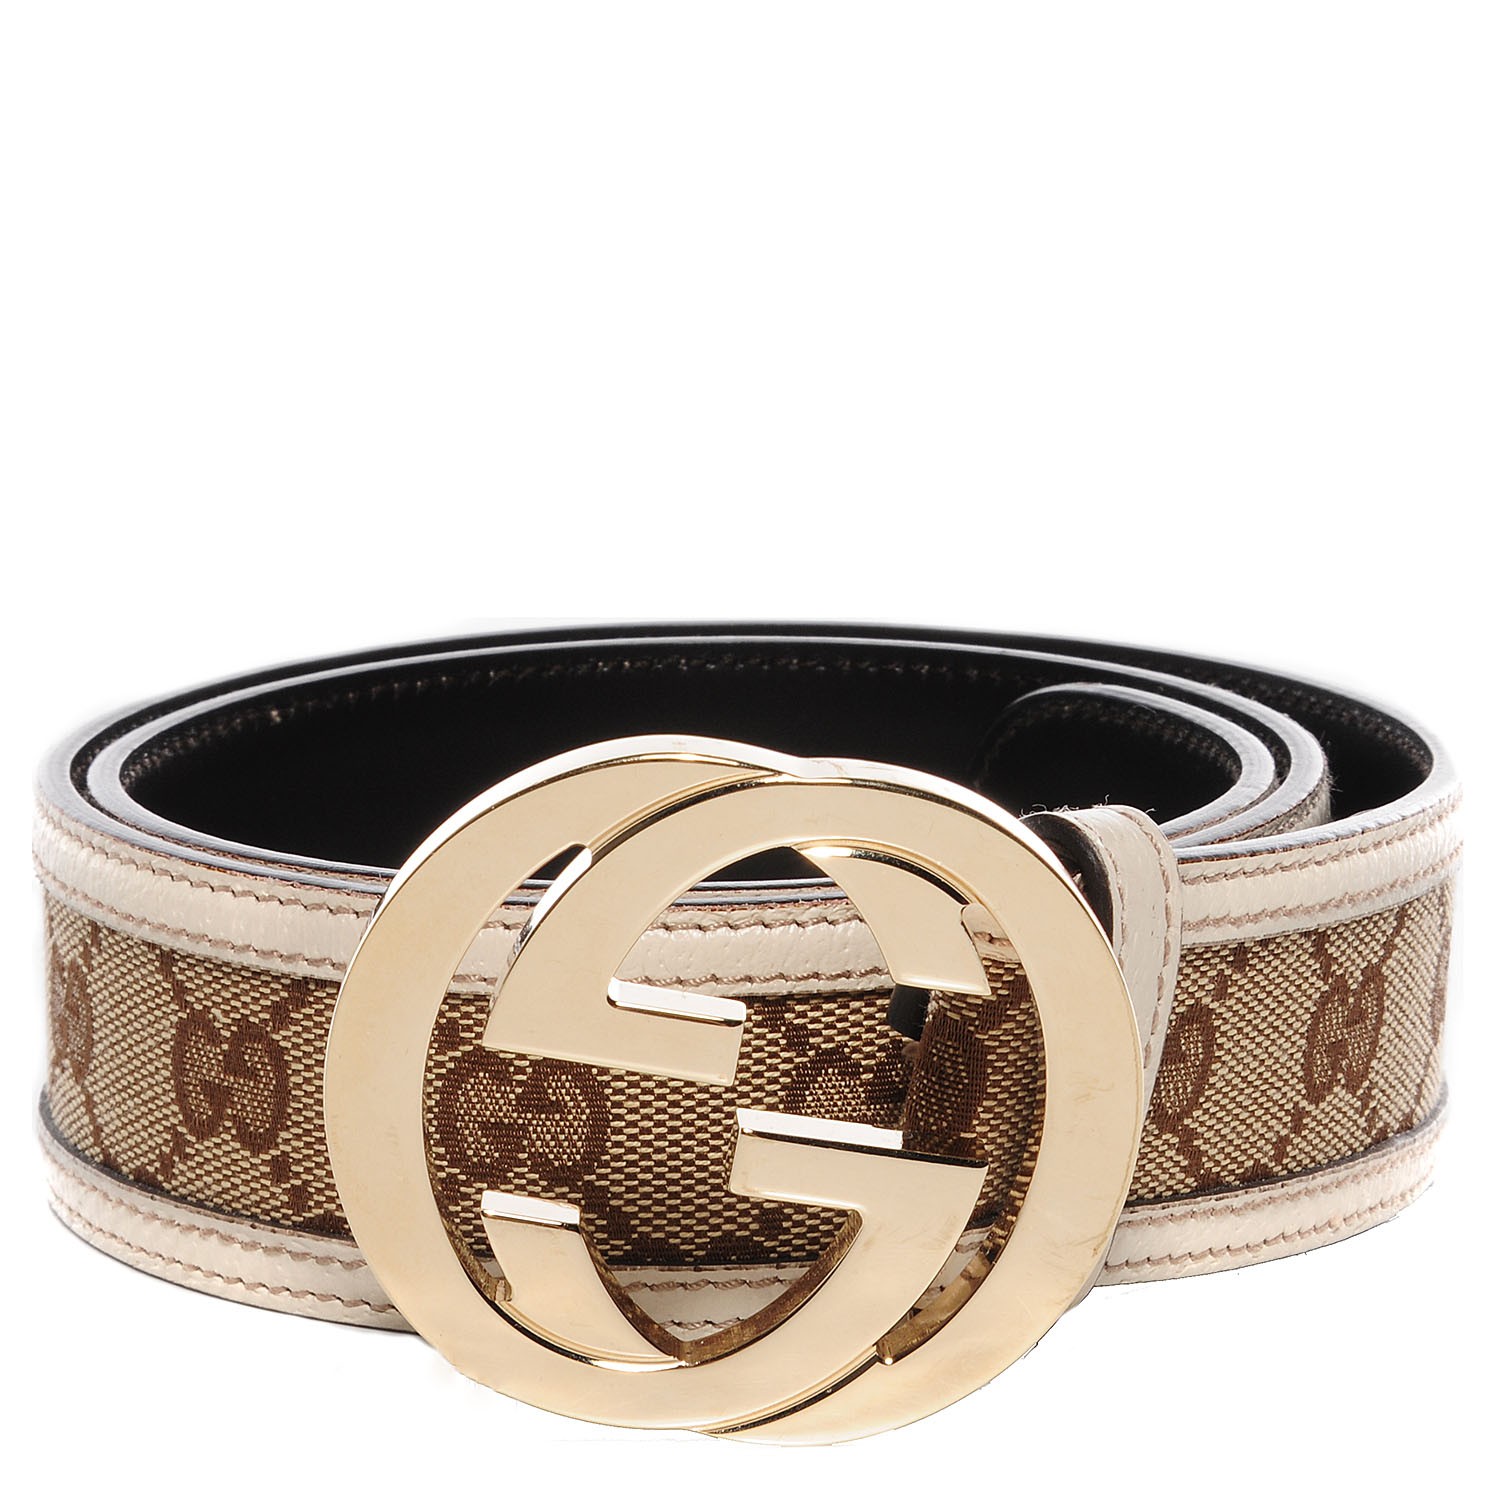 gold and white gucci belt